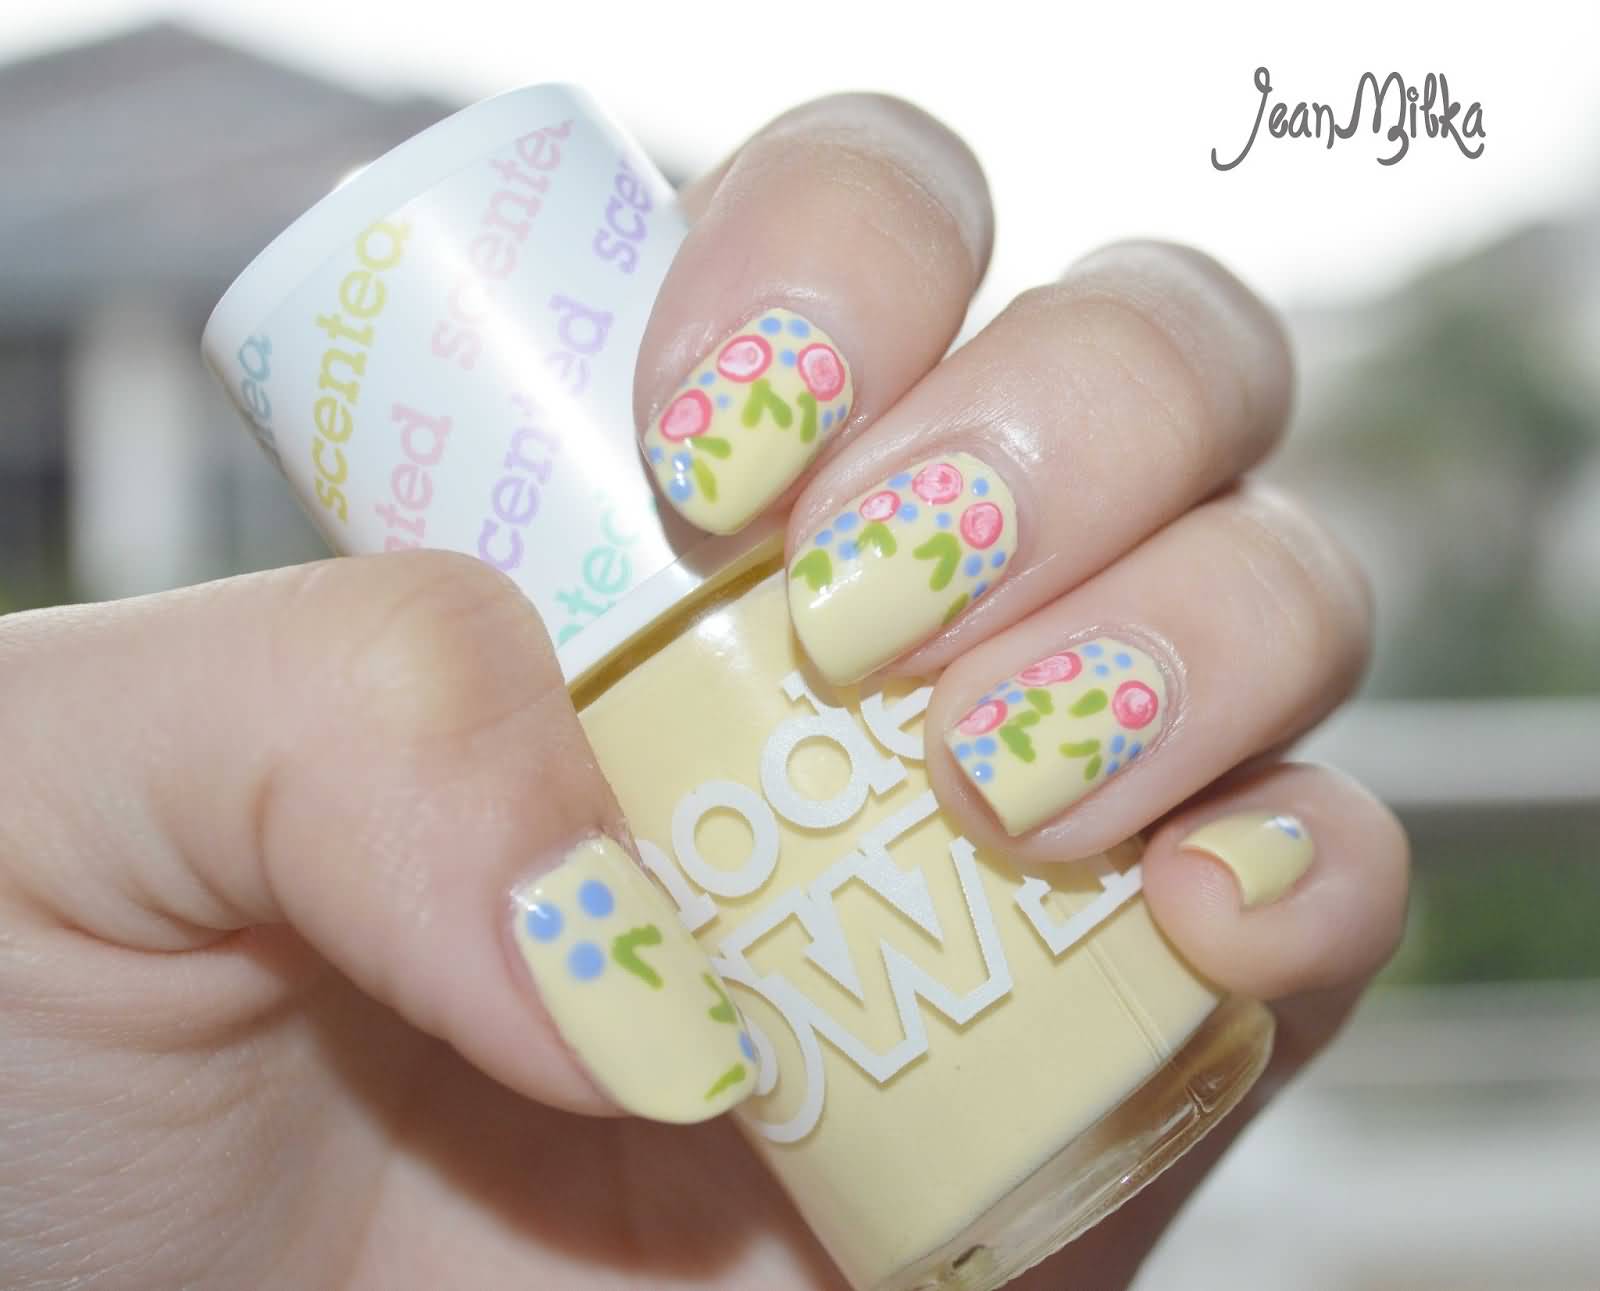 8. Pastel Nail Designs for Teenage Girls - wide 1